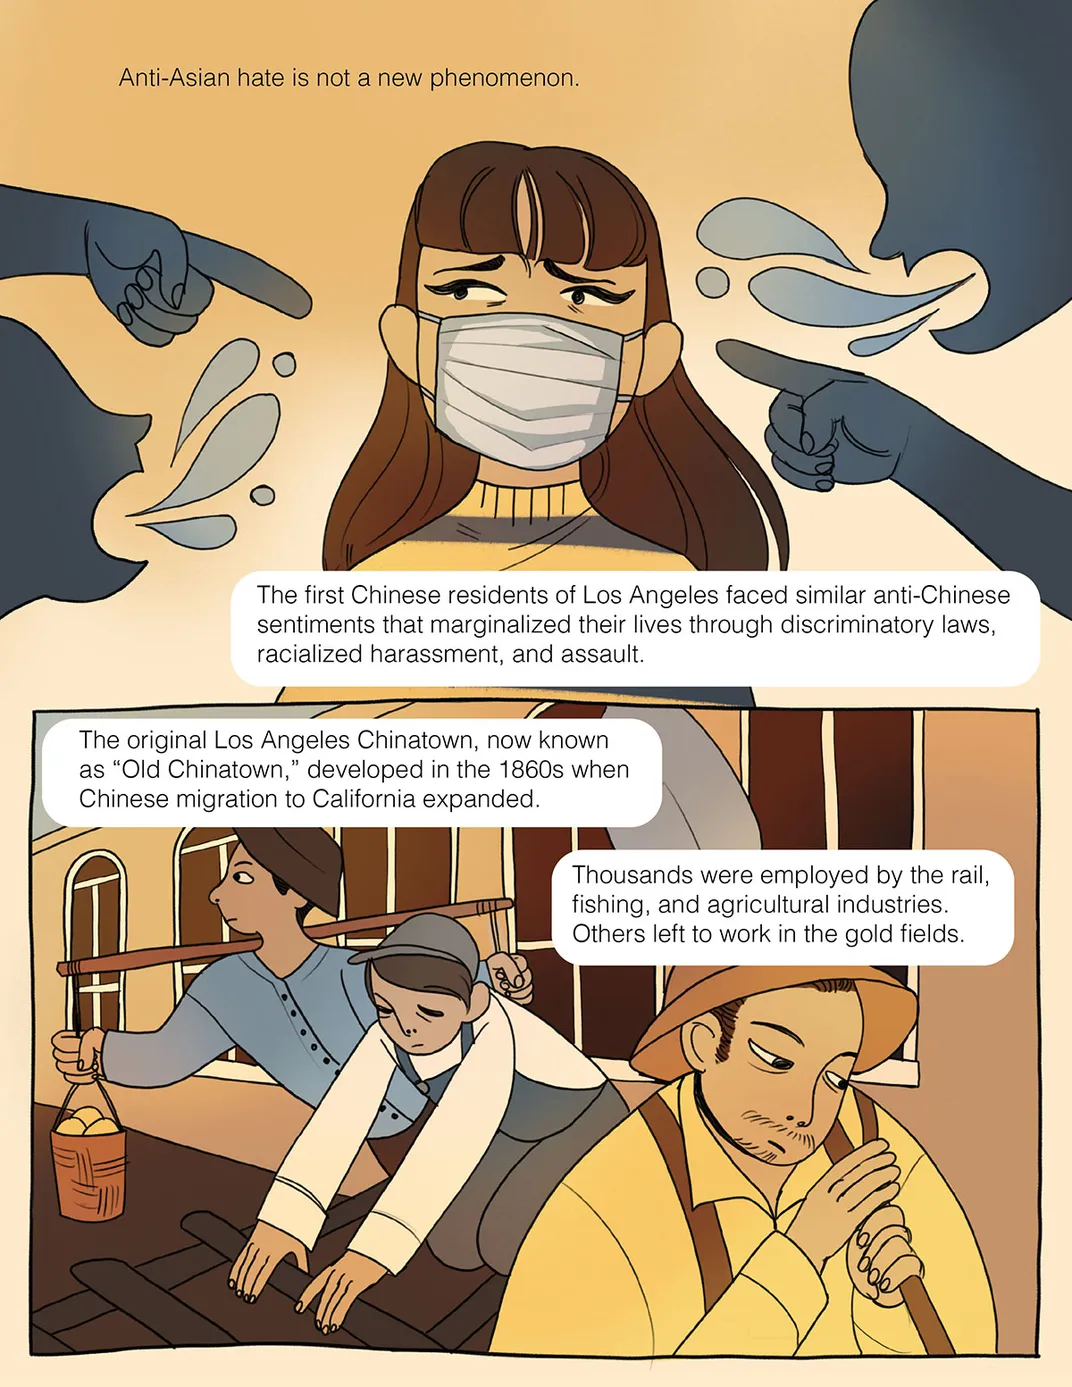 Illustrated comic page. Top panel: Two featureless, shadowy figures yelling and pointing at a masked Asian woman who has an apprehensive look on her face. Text: Anti-Asian hate is not a new phenomenon.